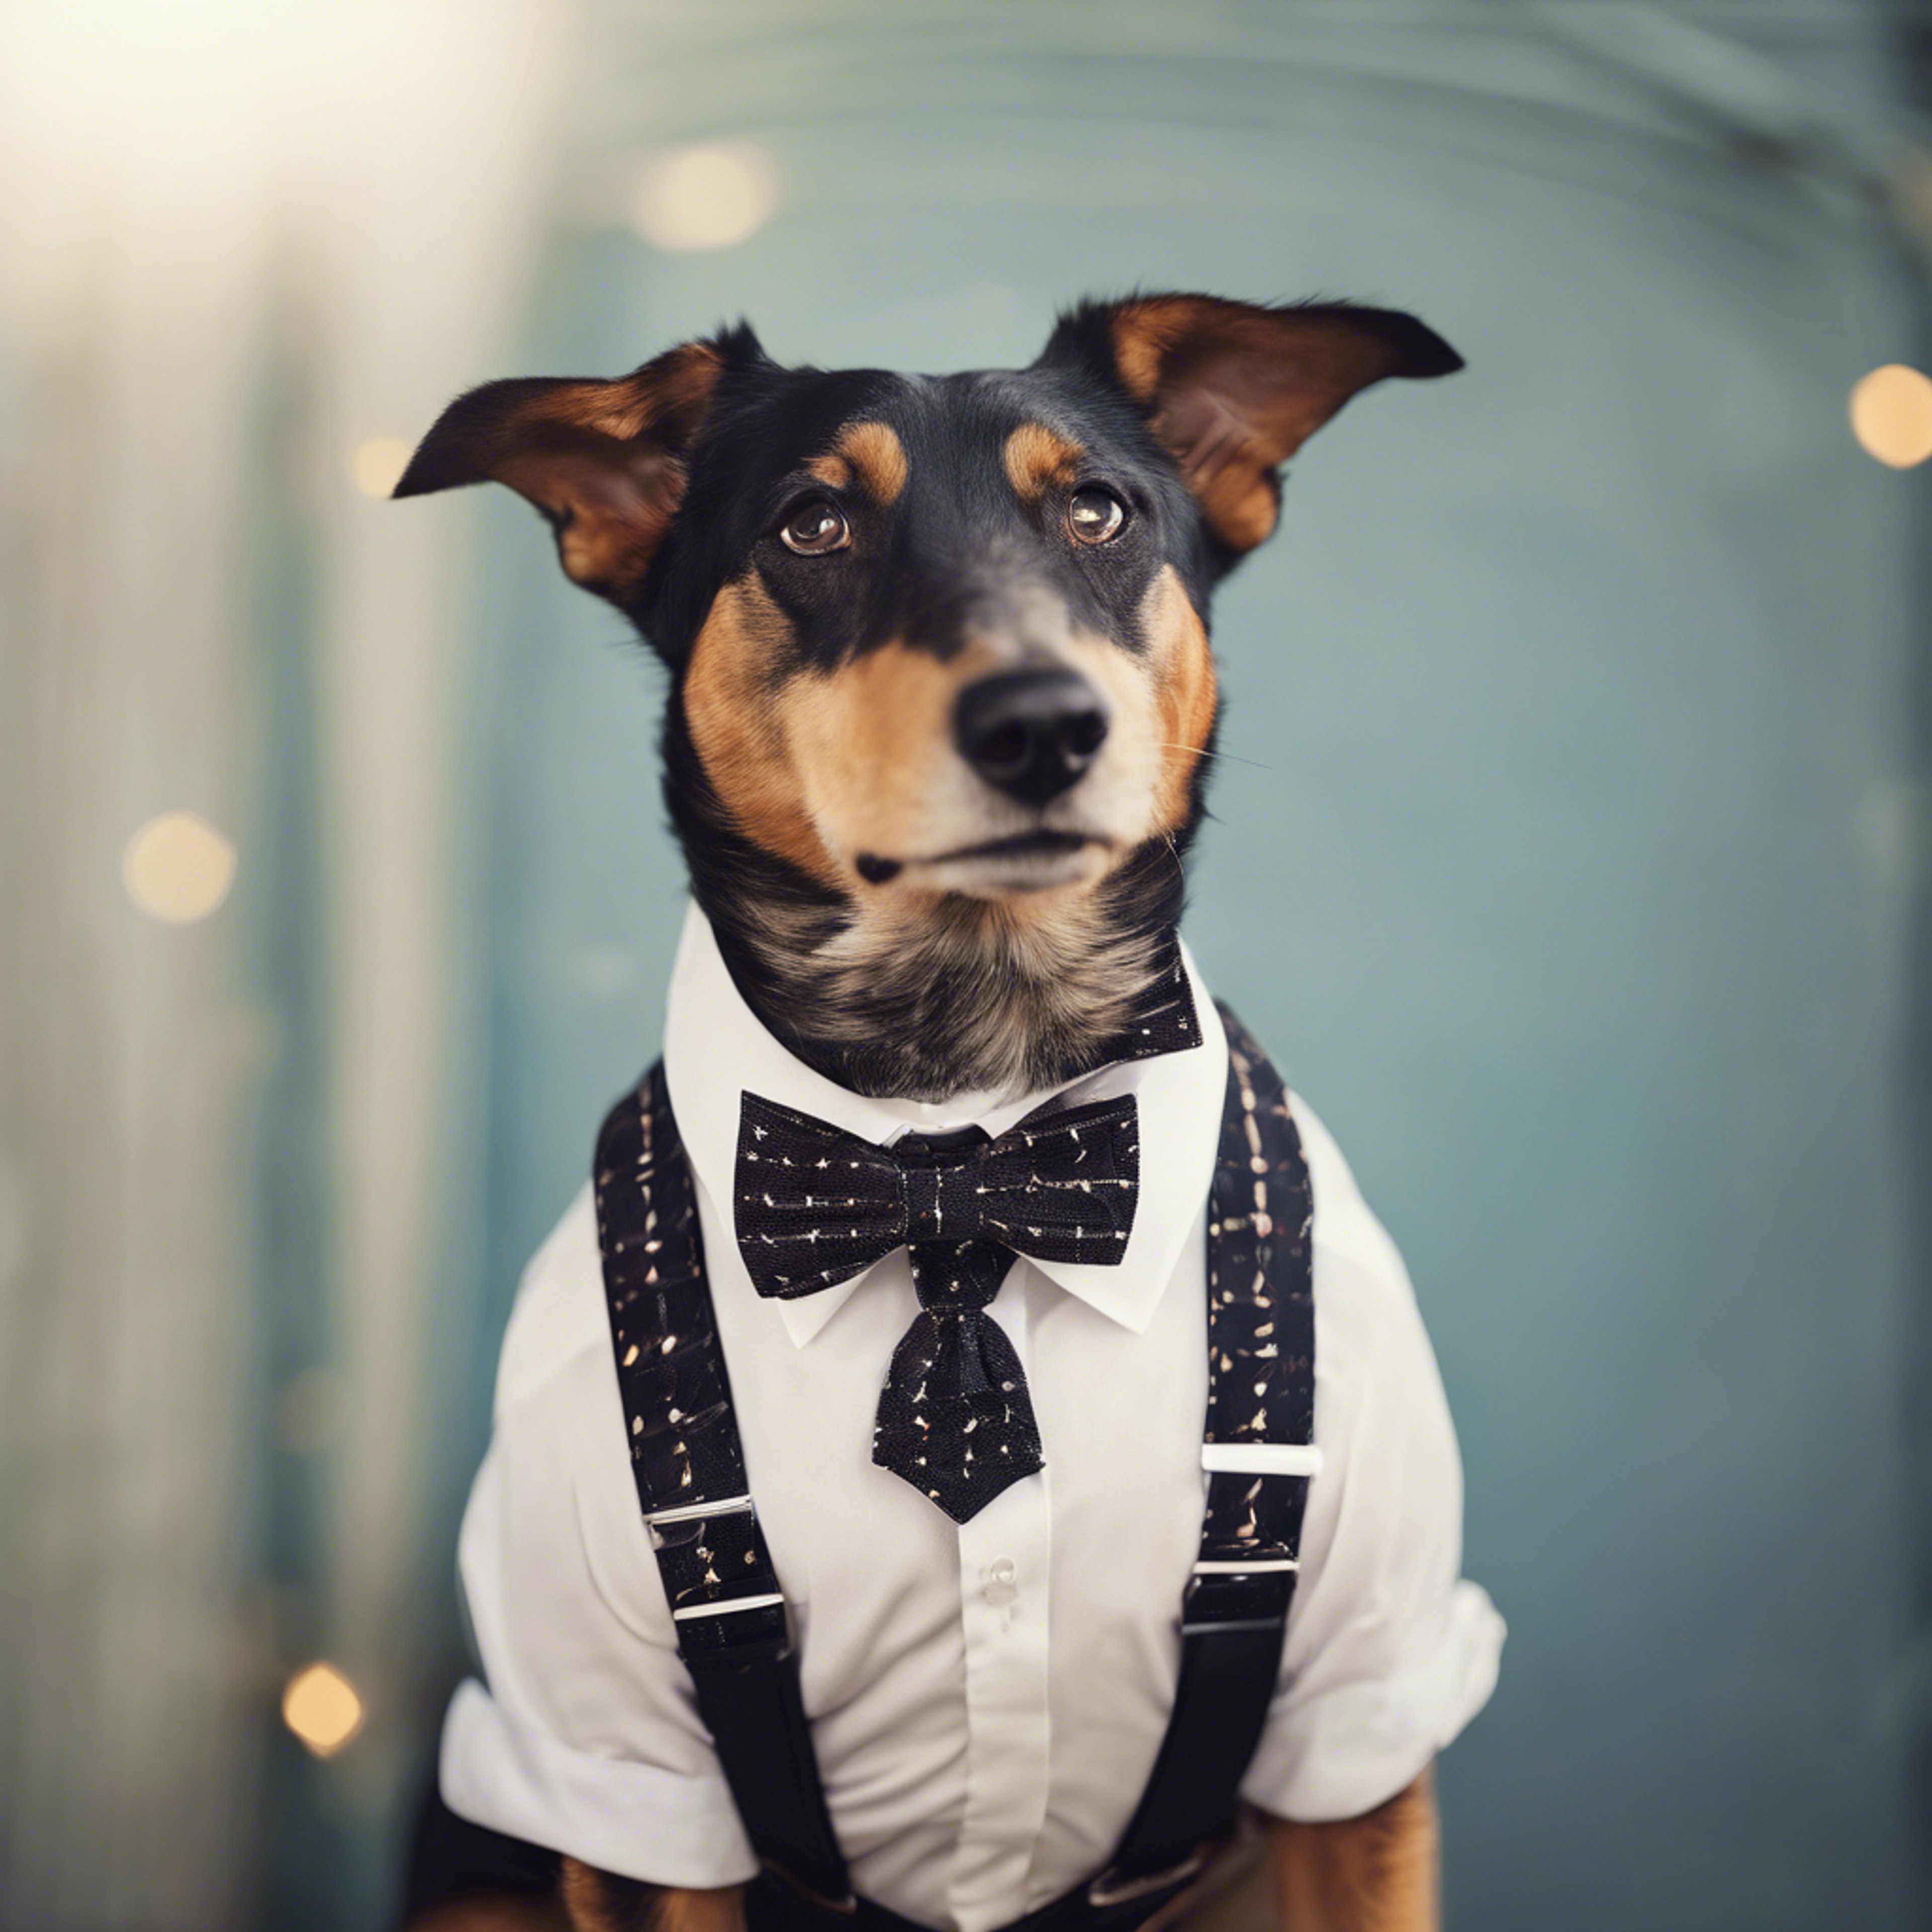 A dapper dog dressed in a cute retro-style outfit, featuring suspenders and bow tie. วอลล์เปเปอร์[69a1531fb80543609416]